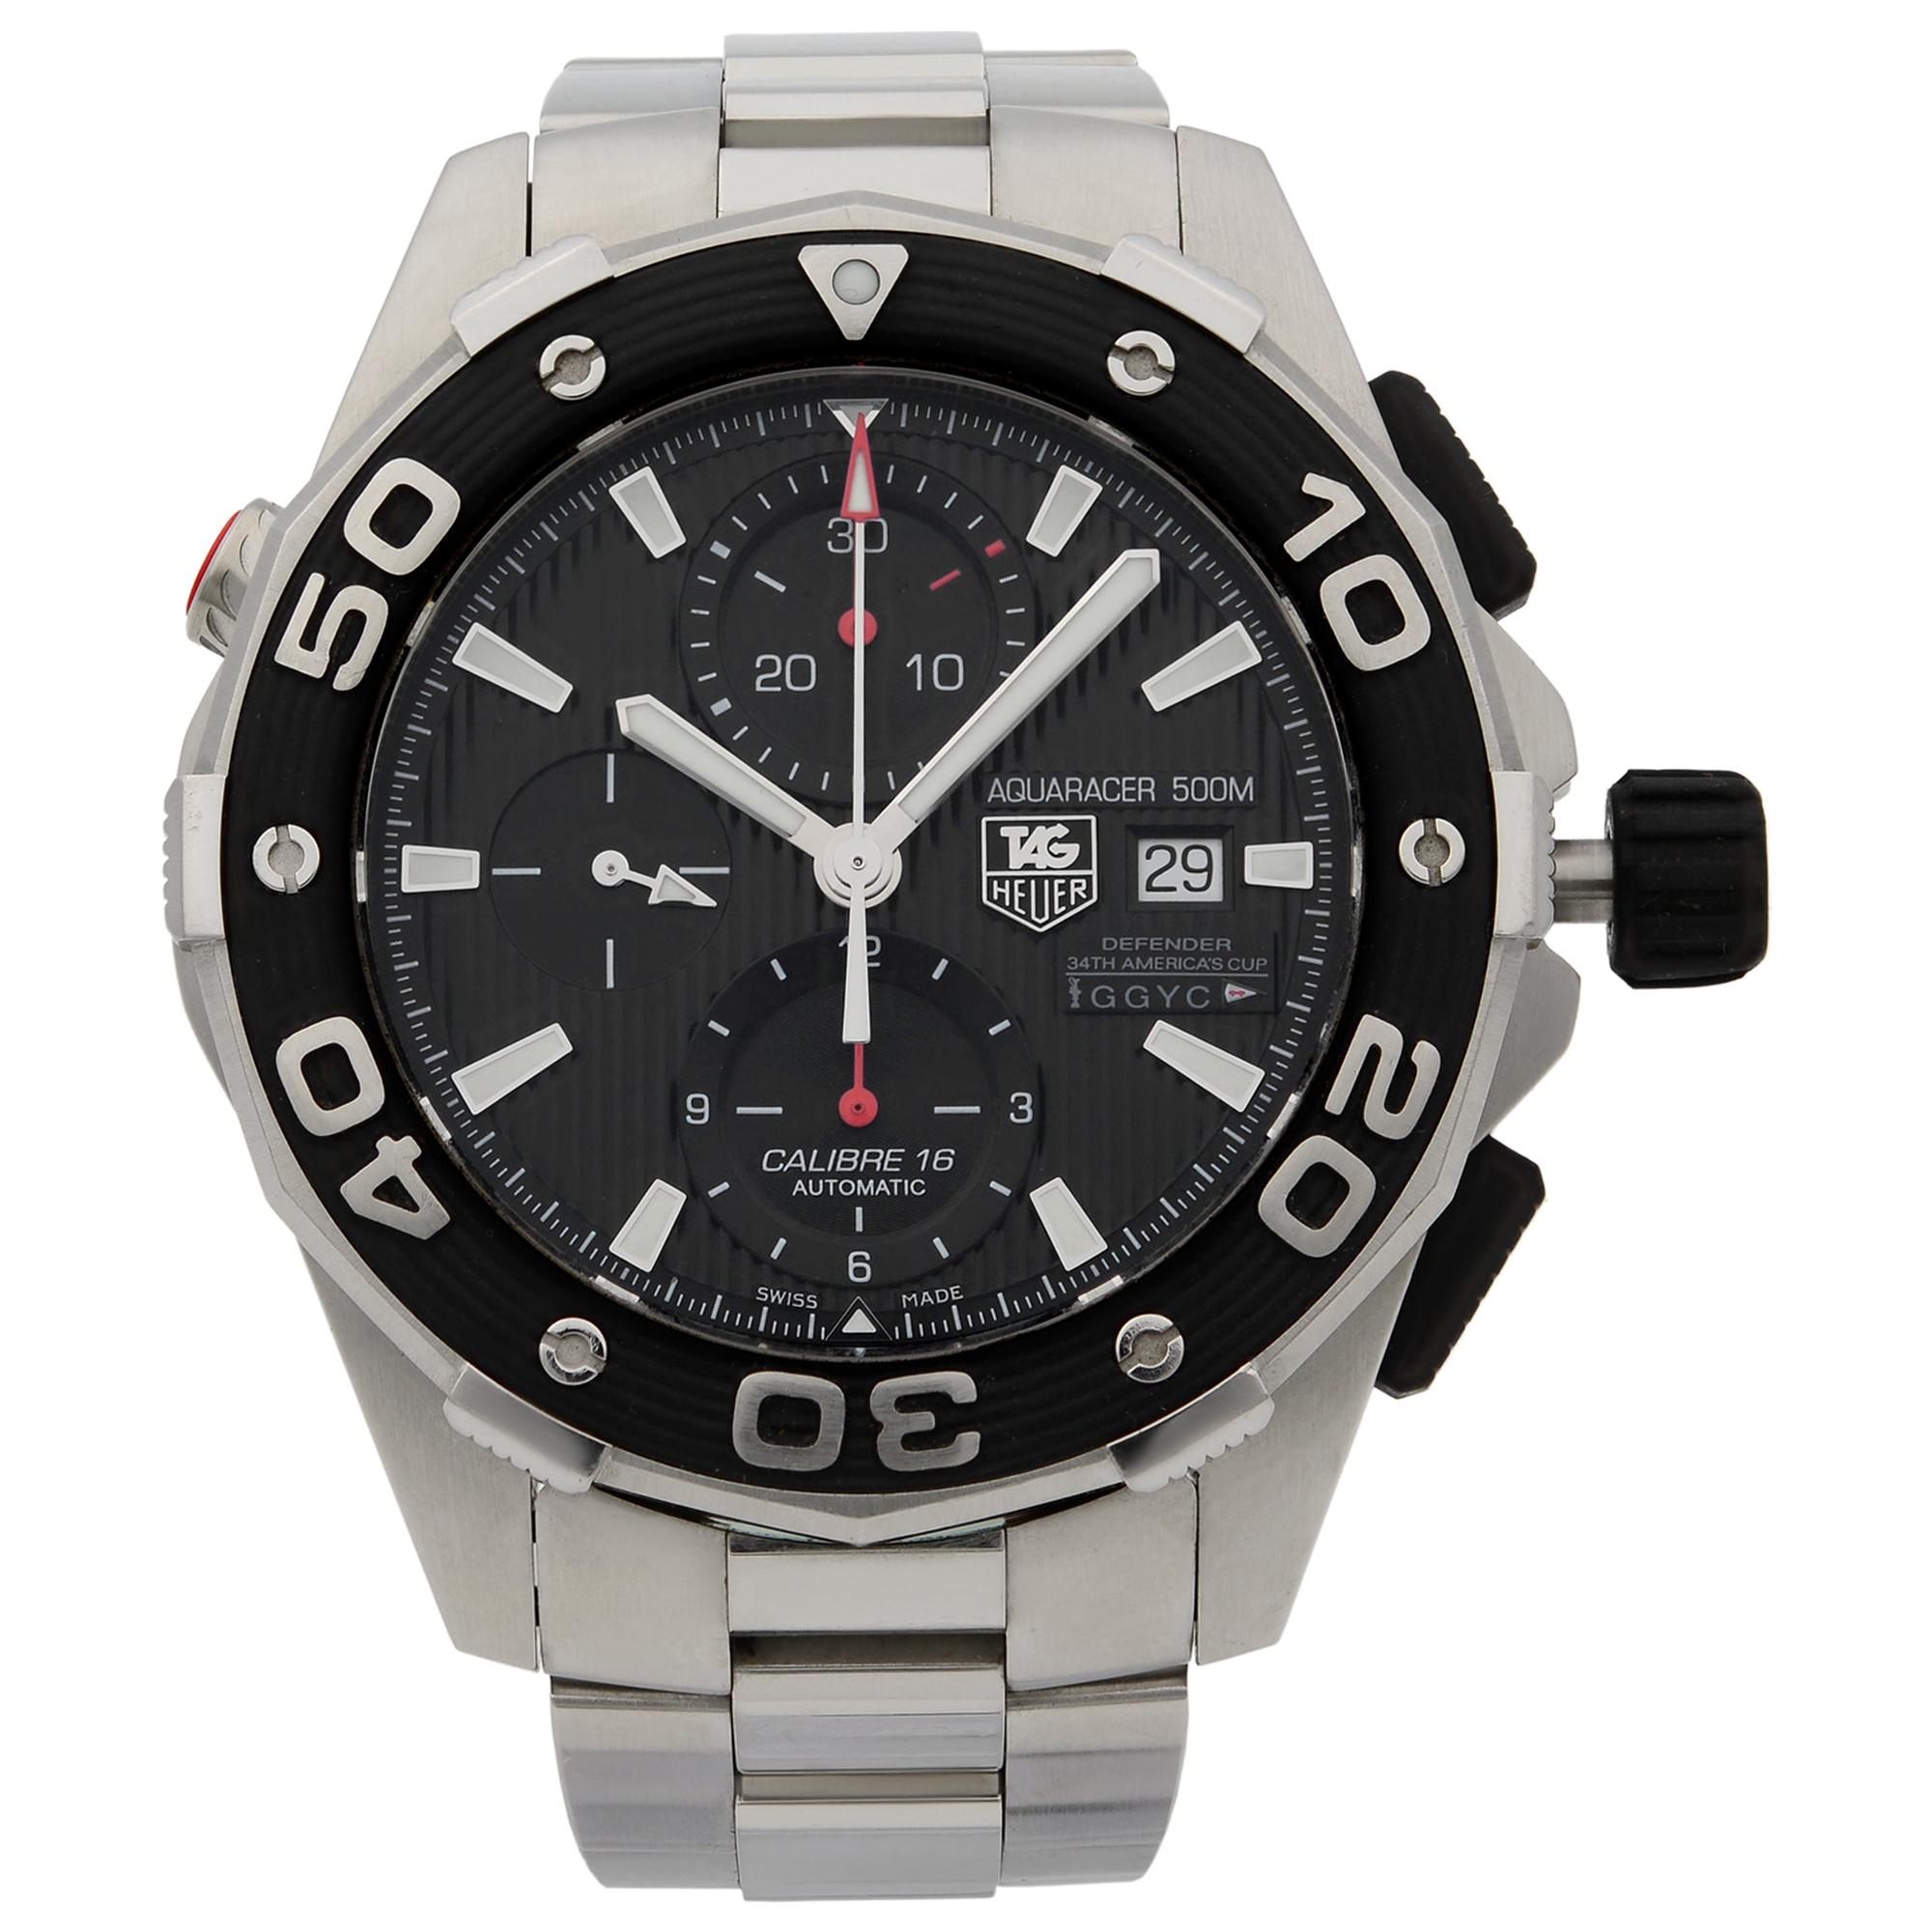 TAG Heuer Aquaracer Limited Edition GGYC Defender Men's Watch CAJ2112.FT6023